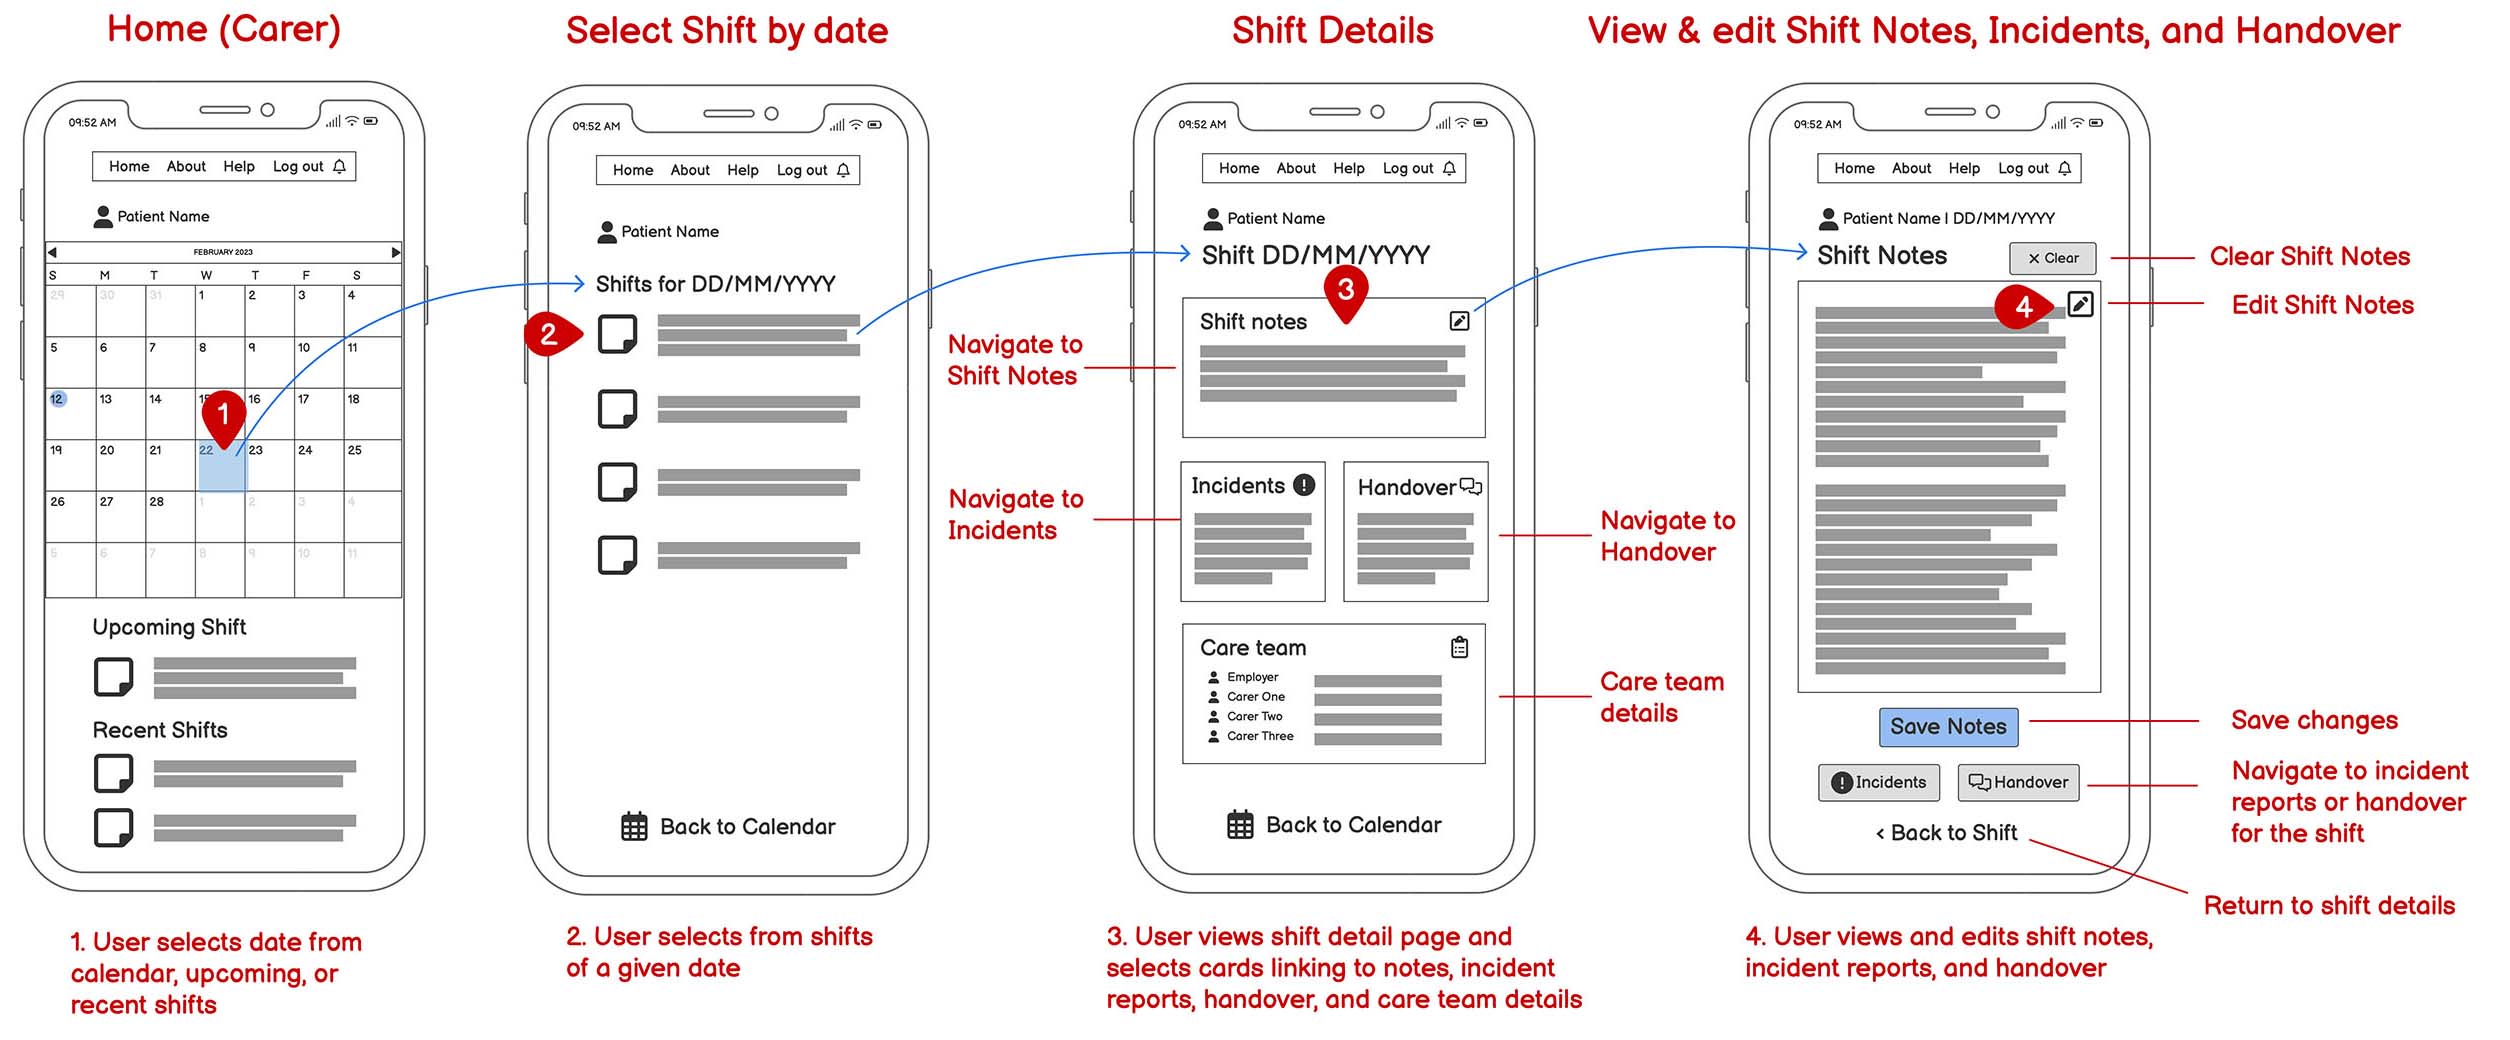 Mobile wireframes showing the carer select and view shift details flow